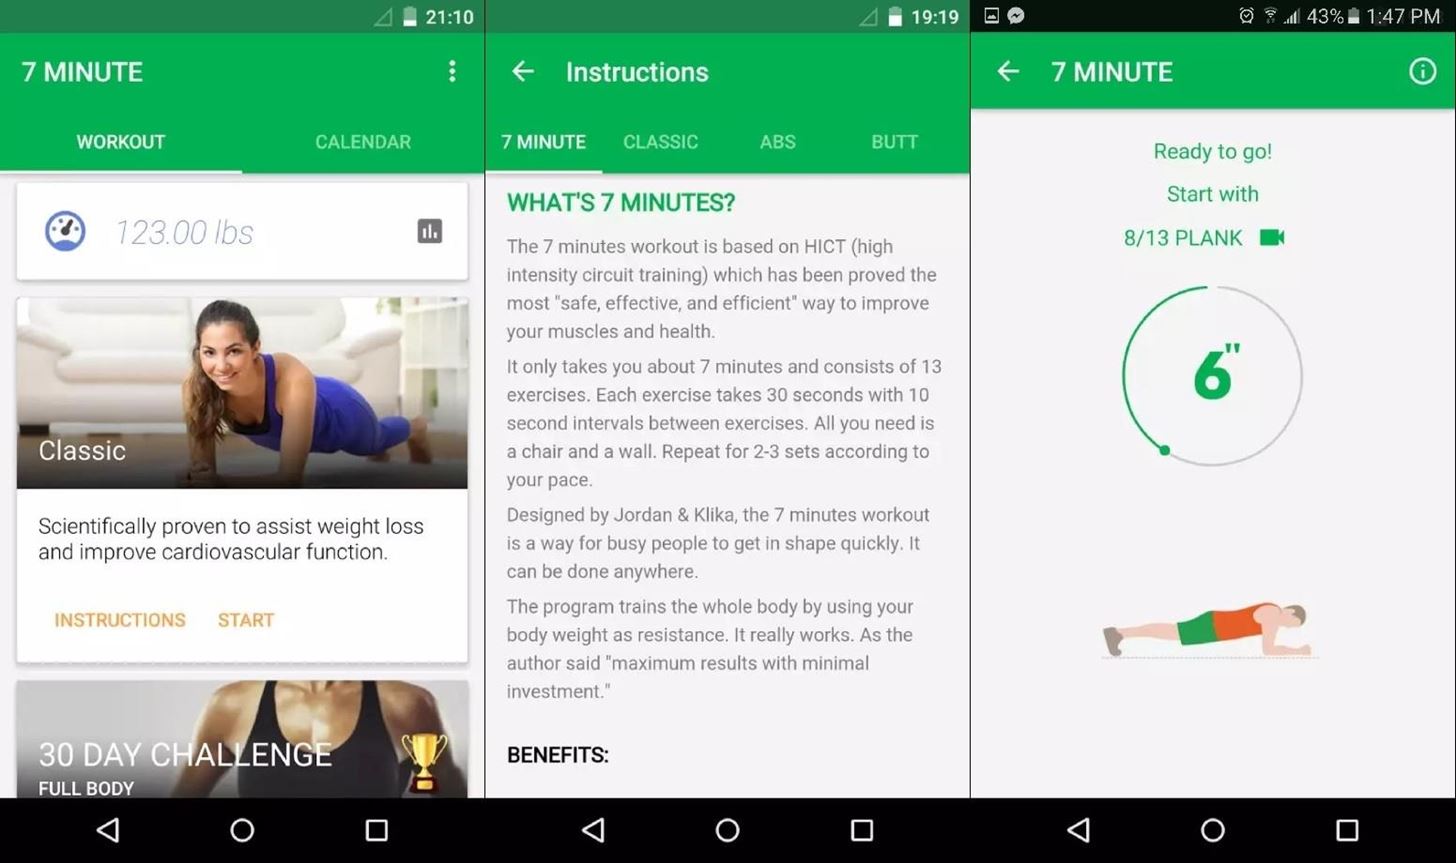 6 Apps to Help You Diet & Exercise More in the New Year